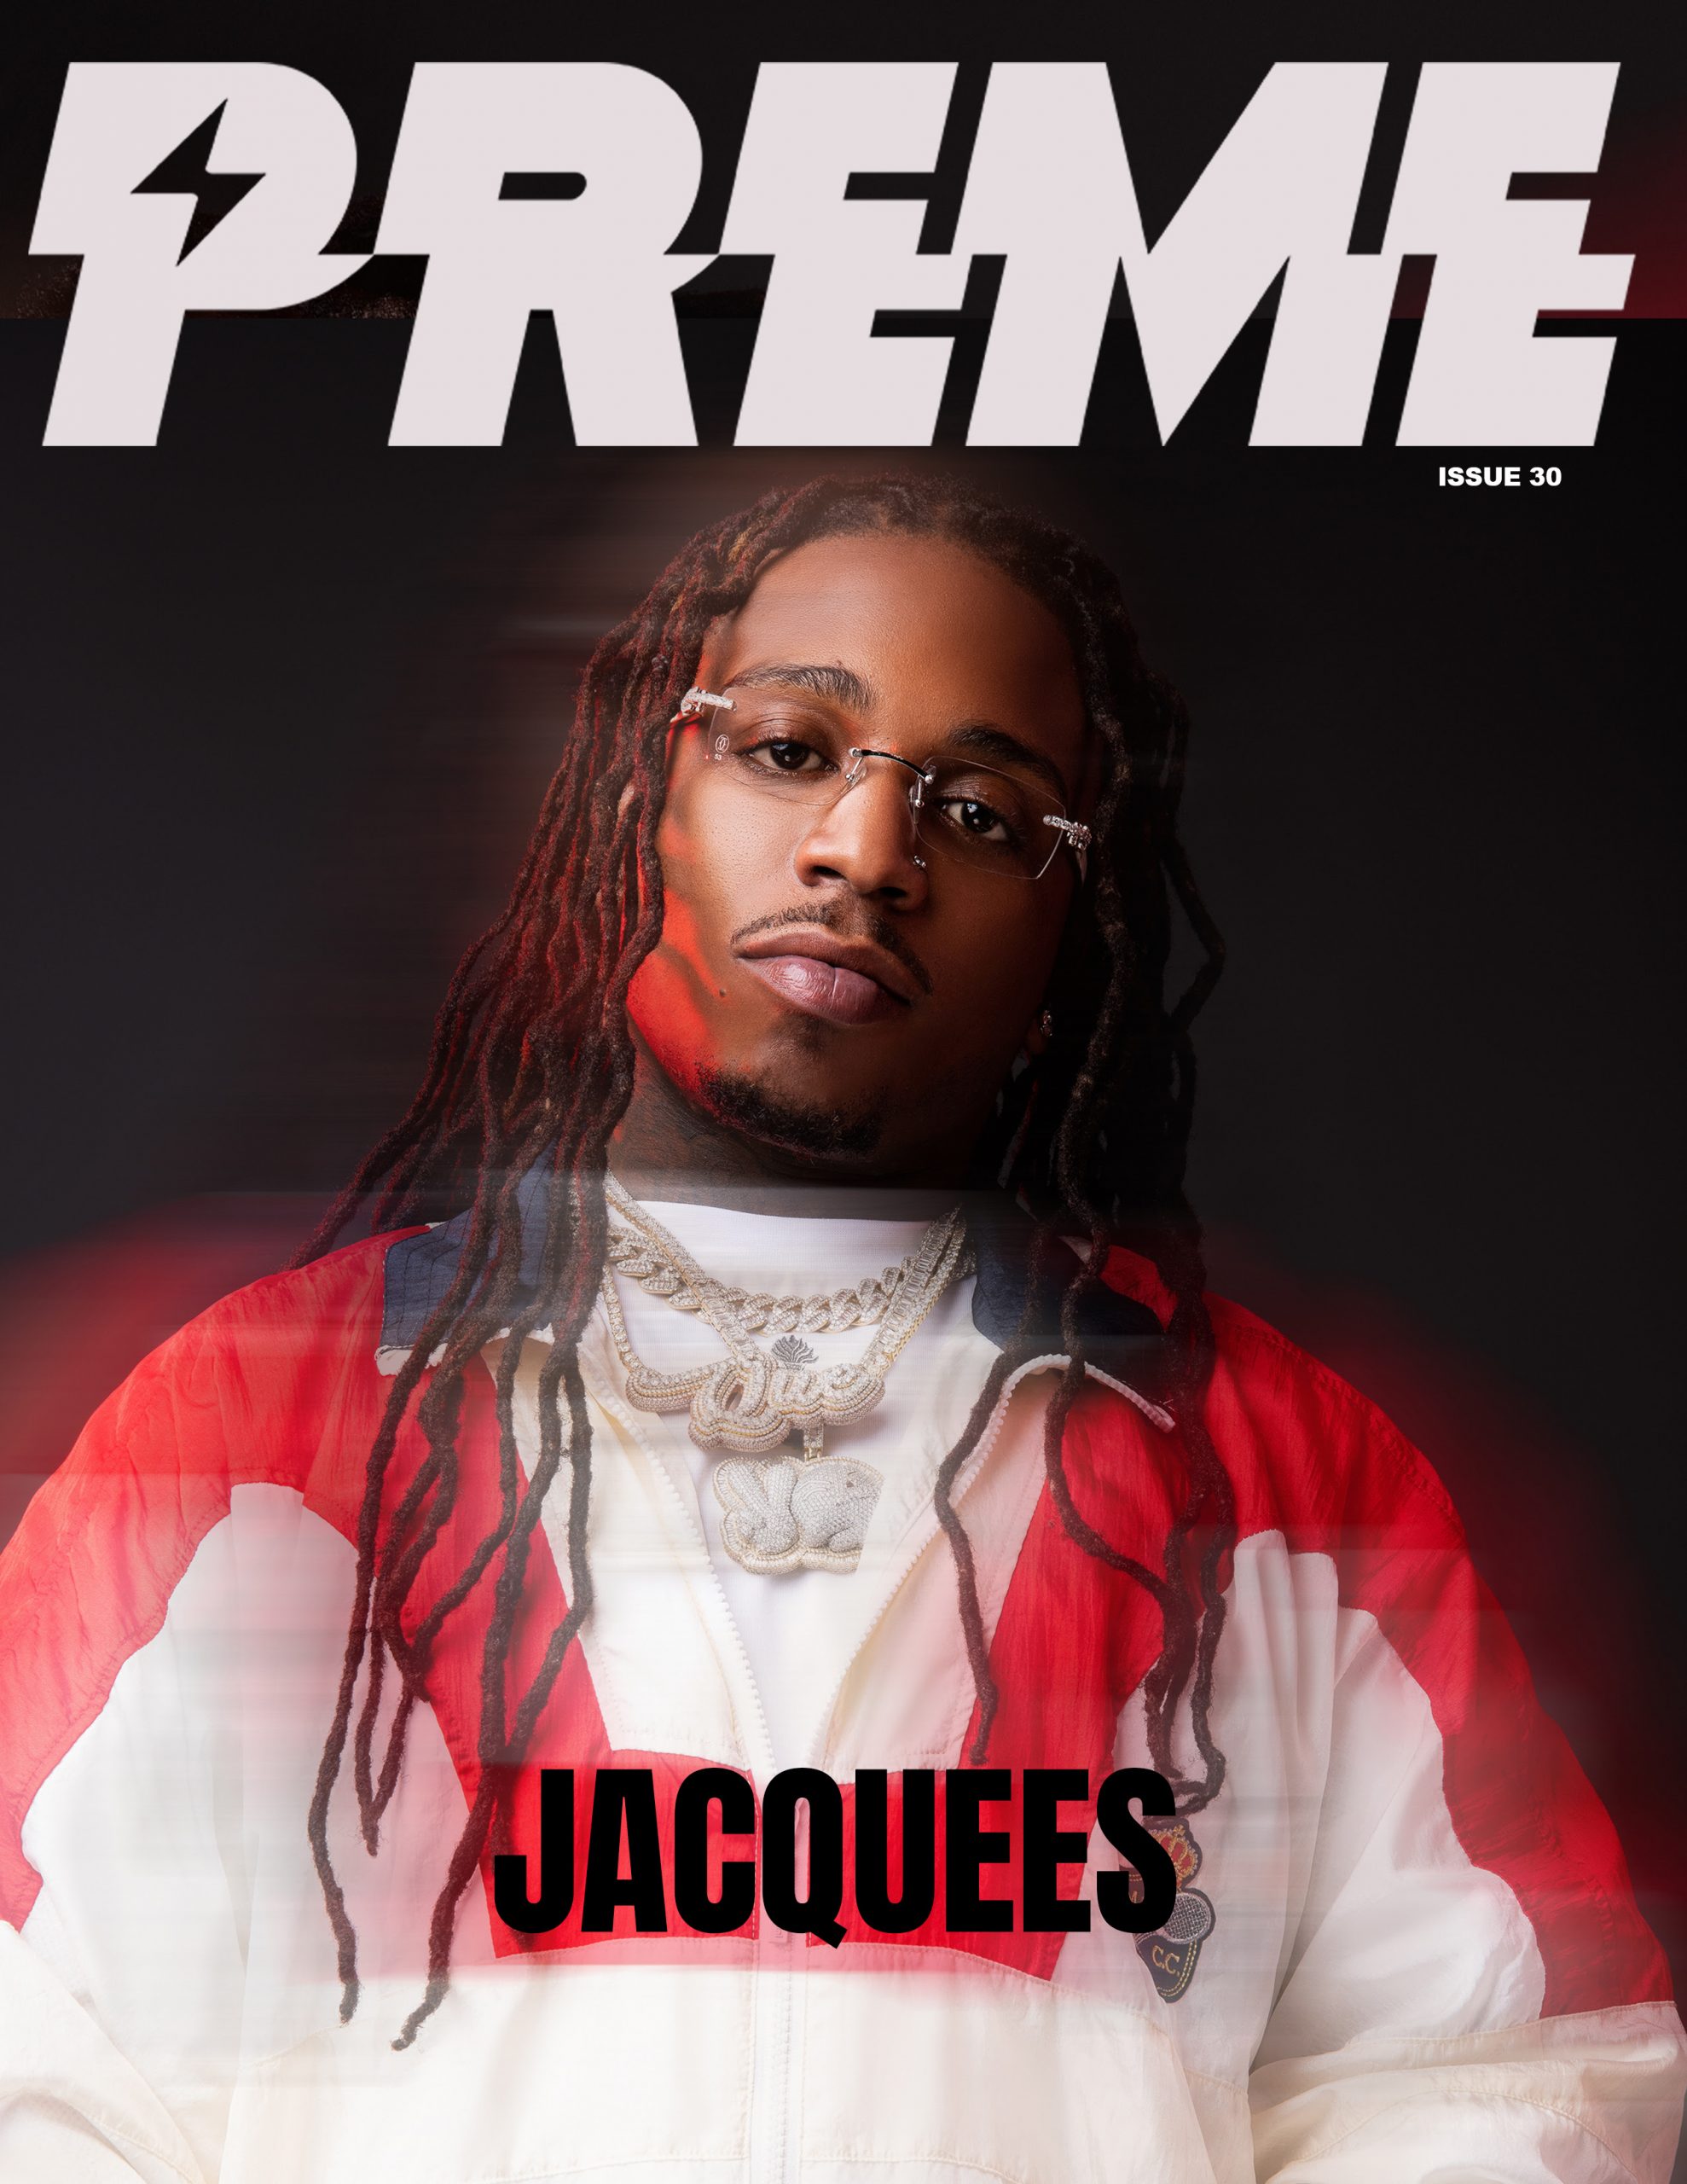 Jacquees - You 